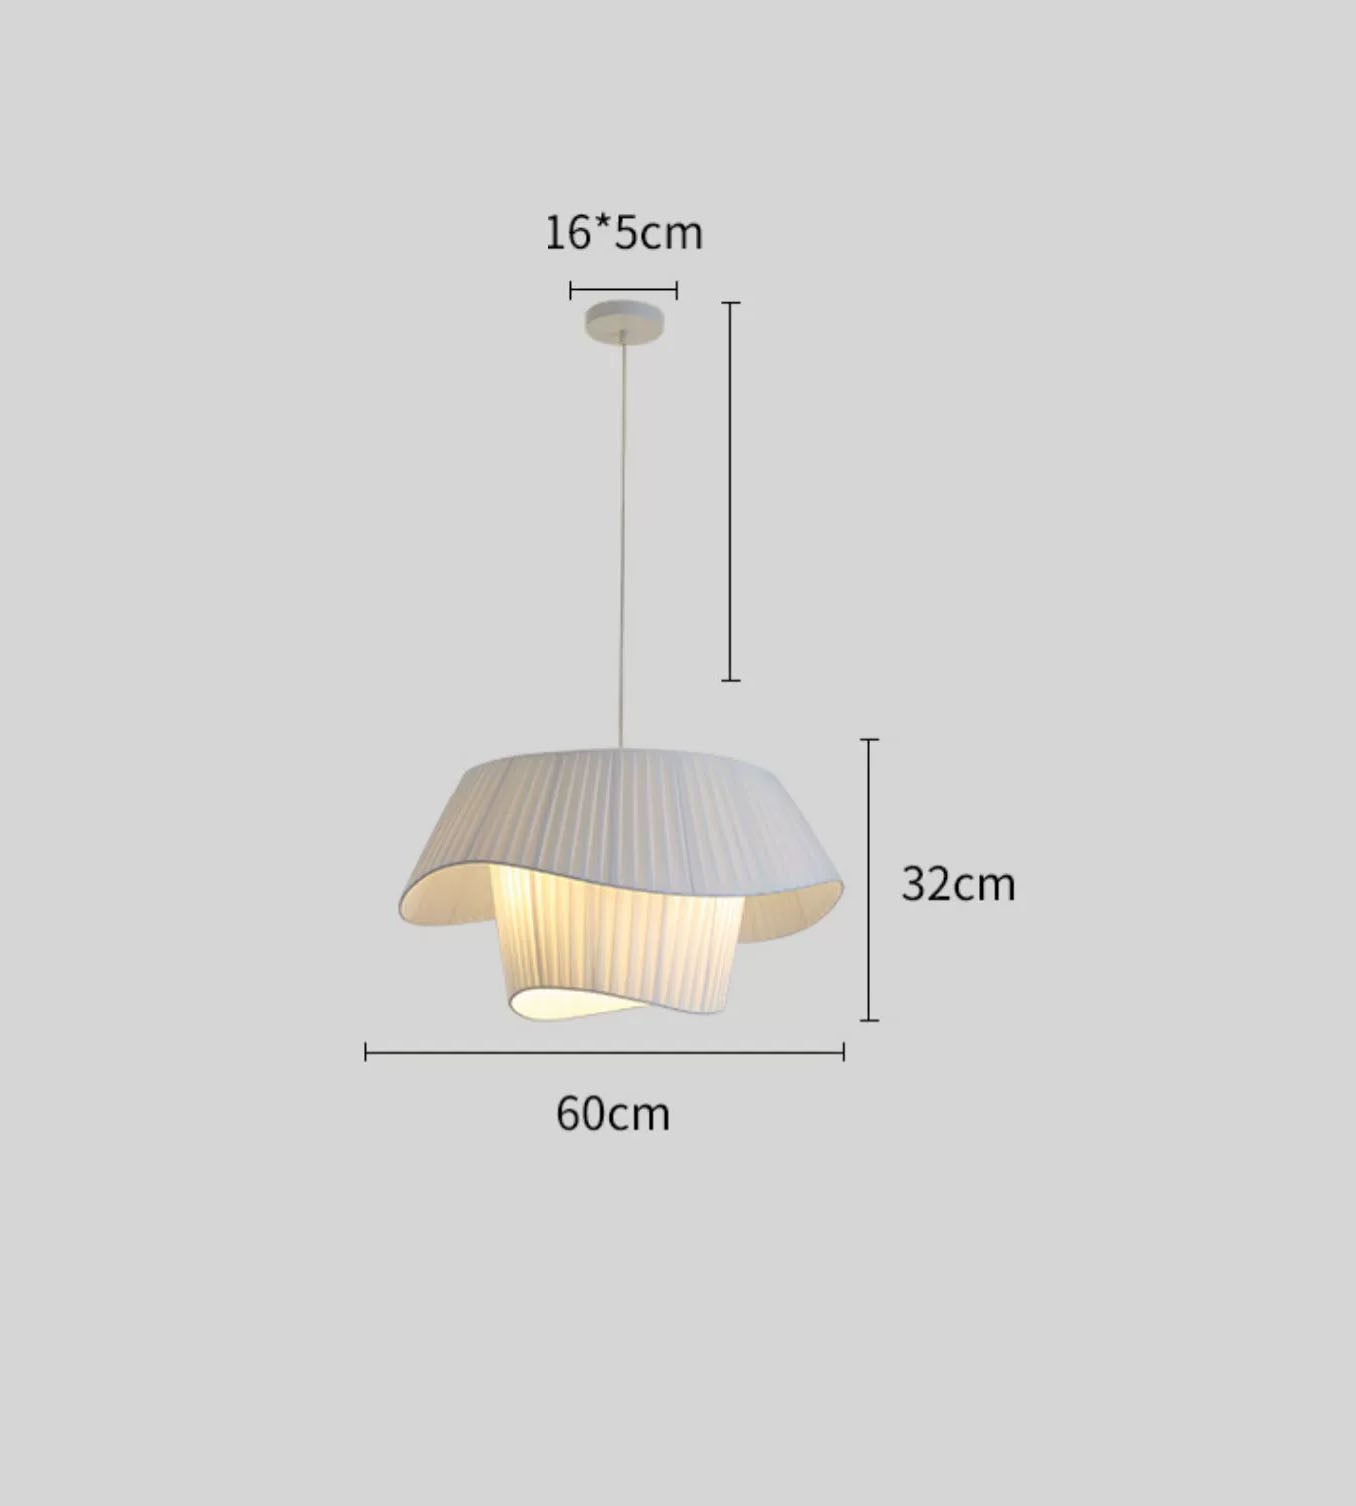 Peplum Ceiling Lampshade from DGY